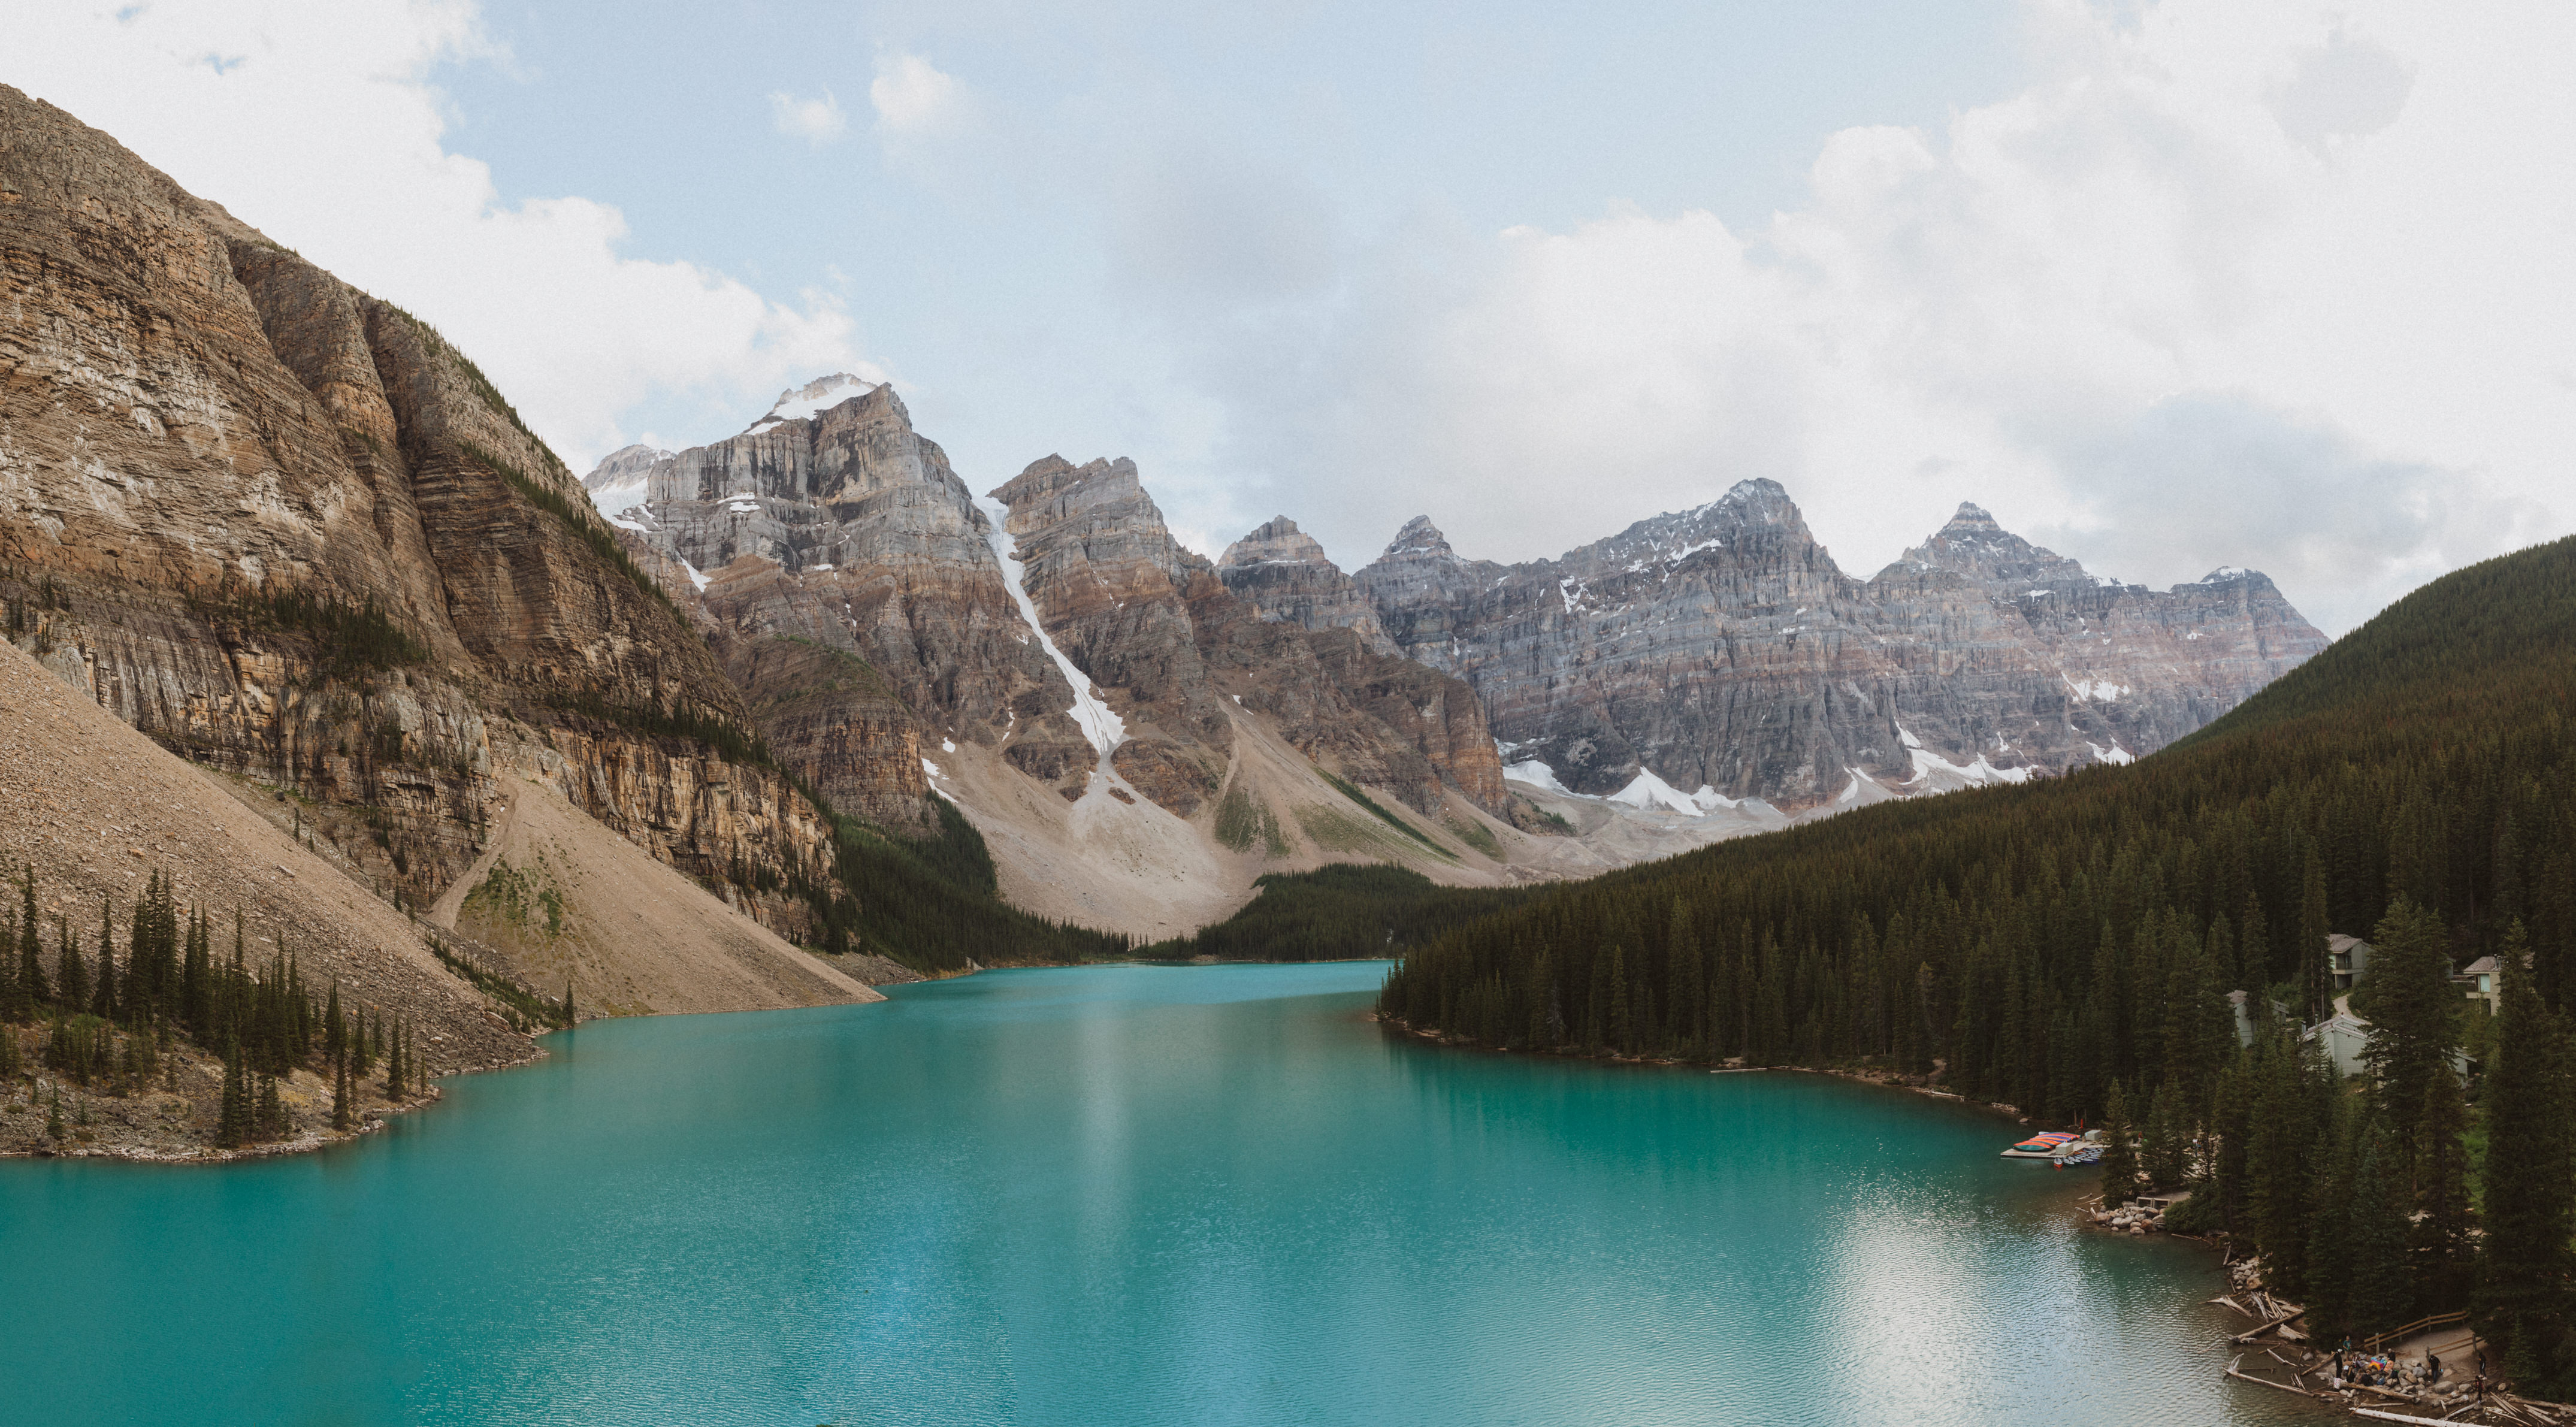 make sure to visit Moraine Lake when traveling to Banff